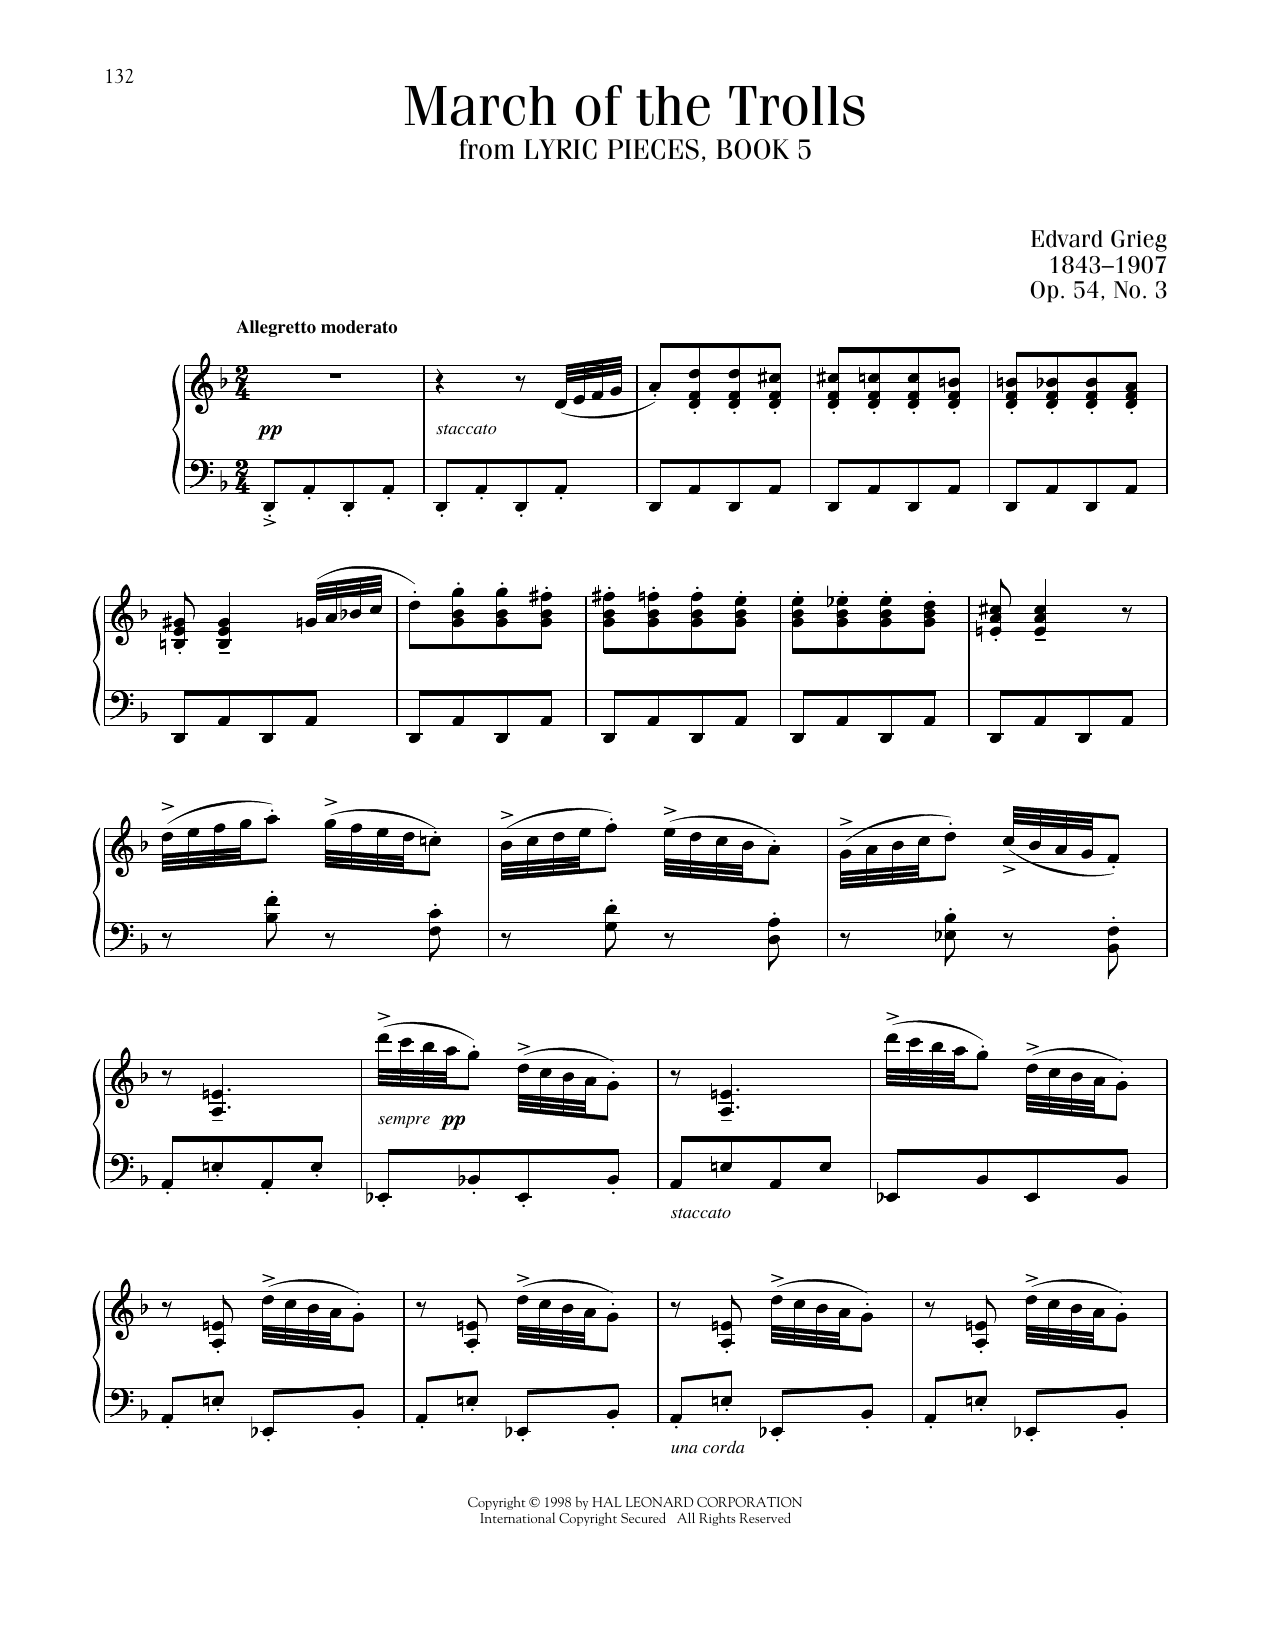 Edvard Grieg March Of The Trolls, Op. 54, No. 3 sheet music notes printable PDF score